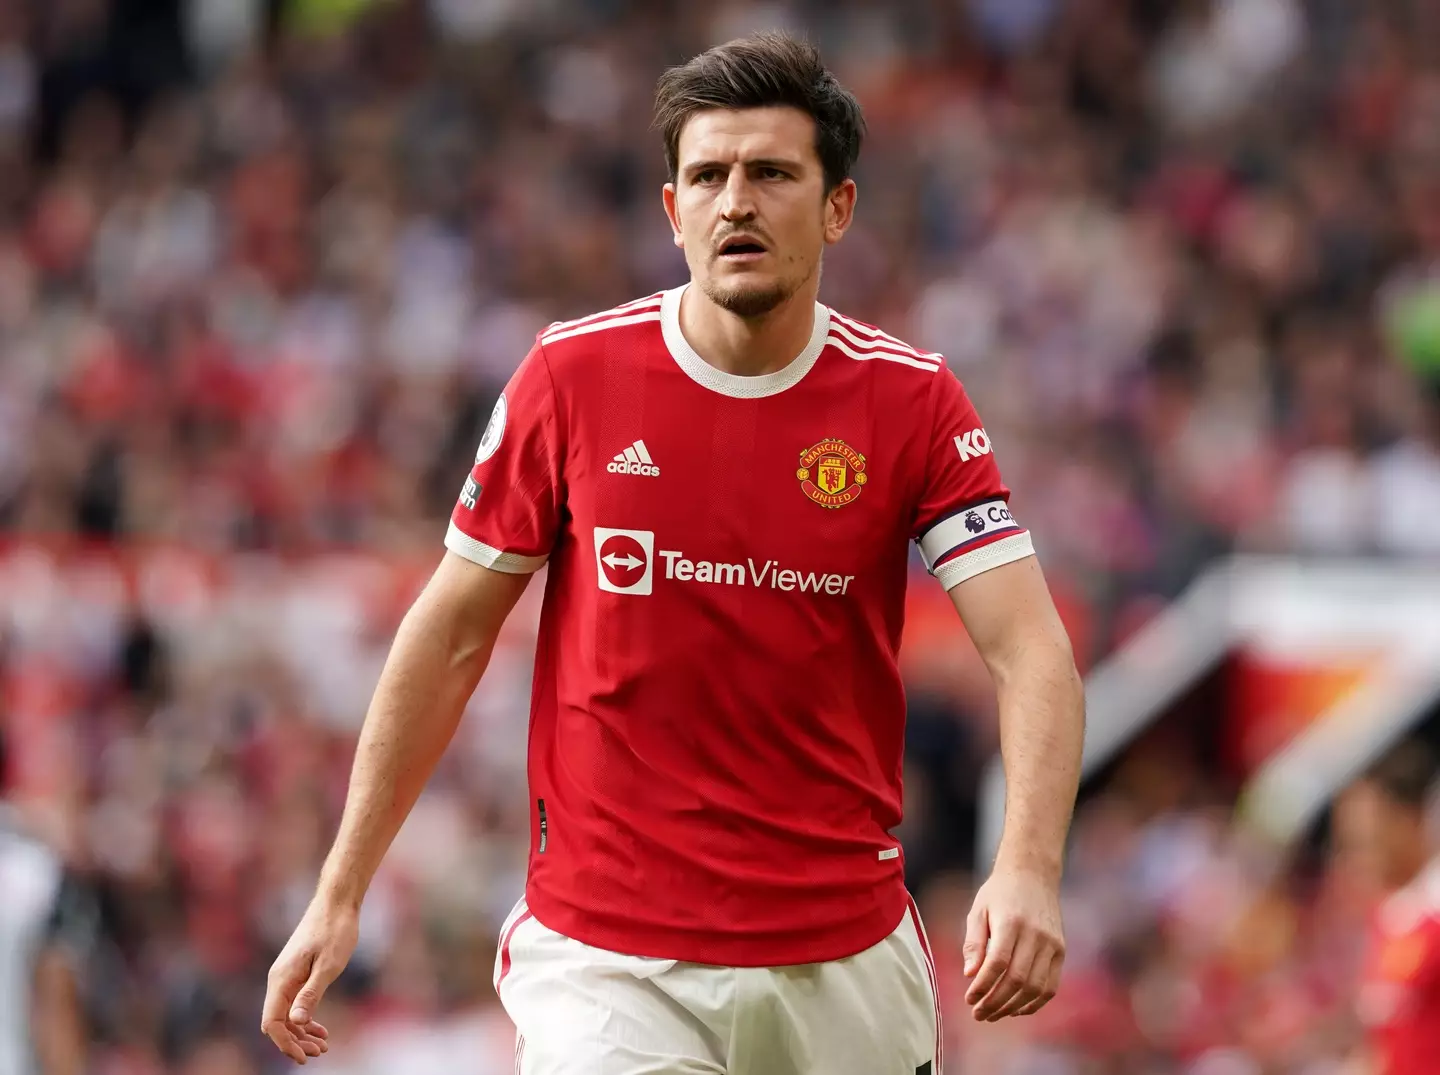 Harry Maguire's aerial ability is something that troubles opposition defence, especially from set-pieces